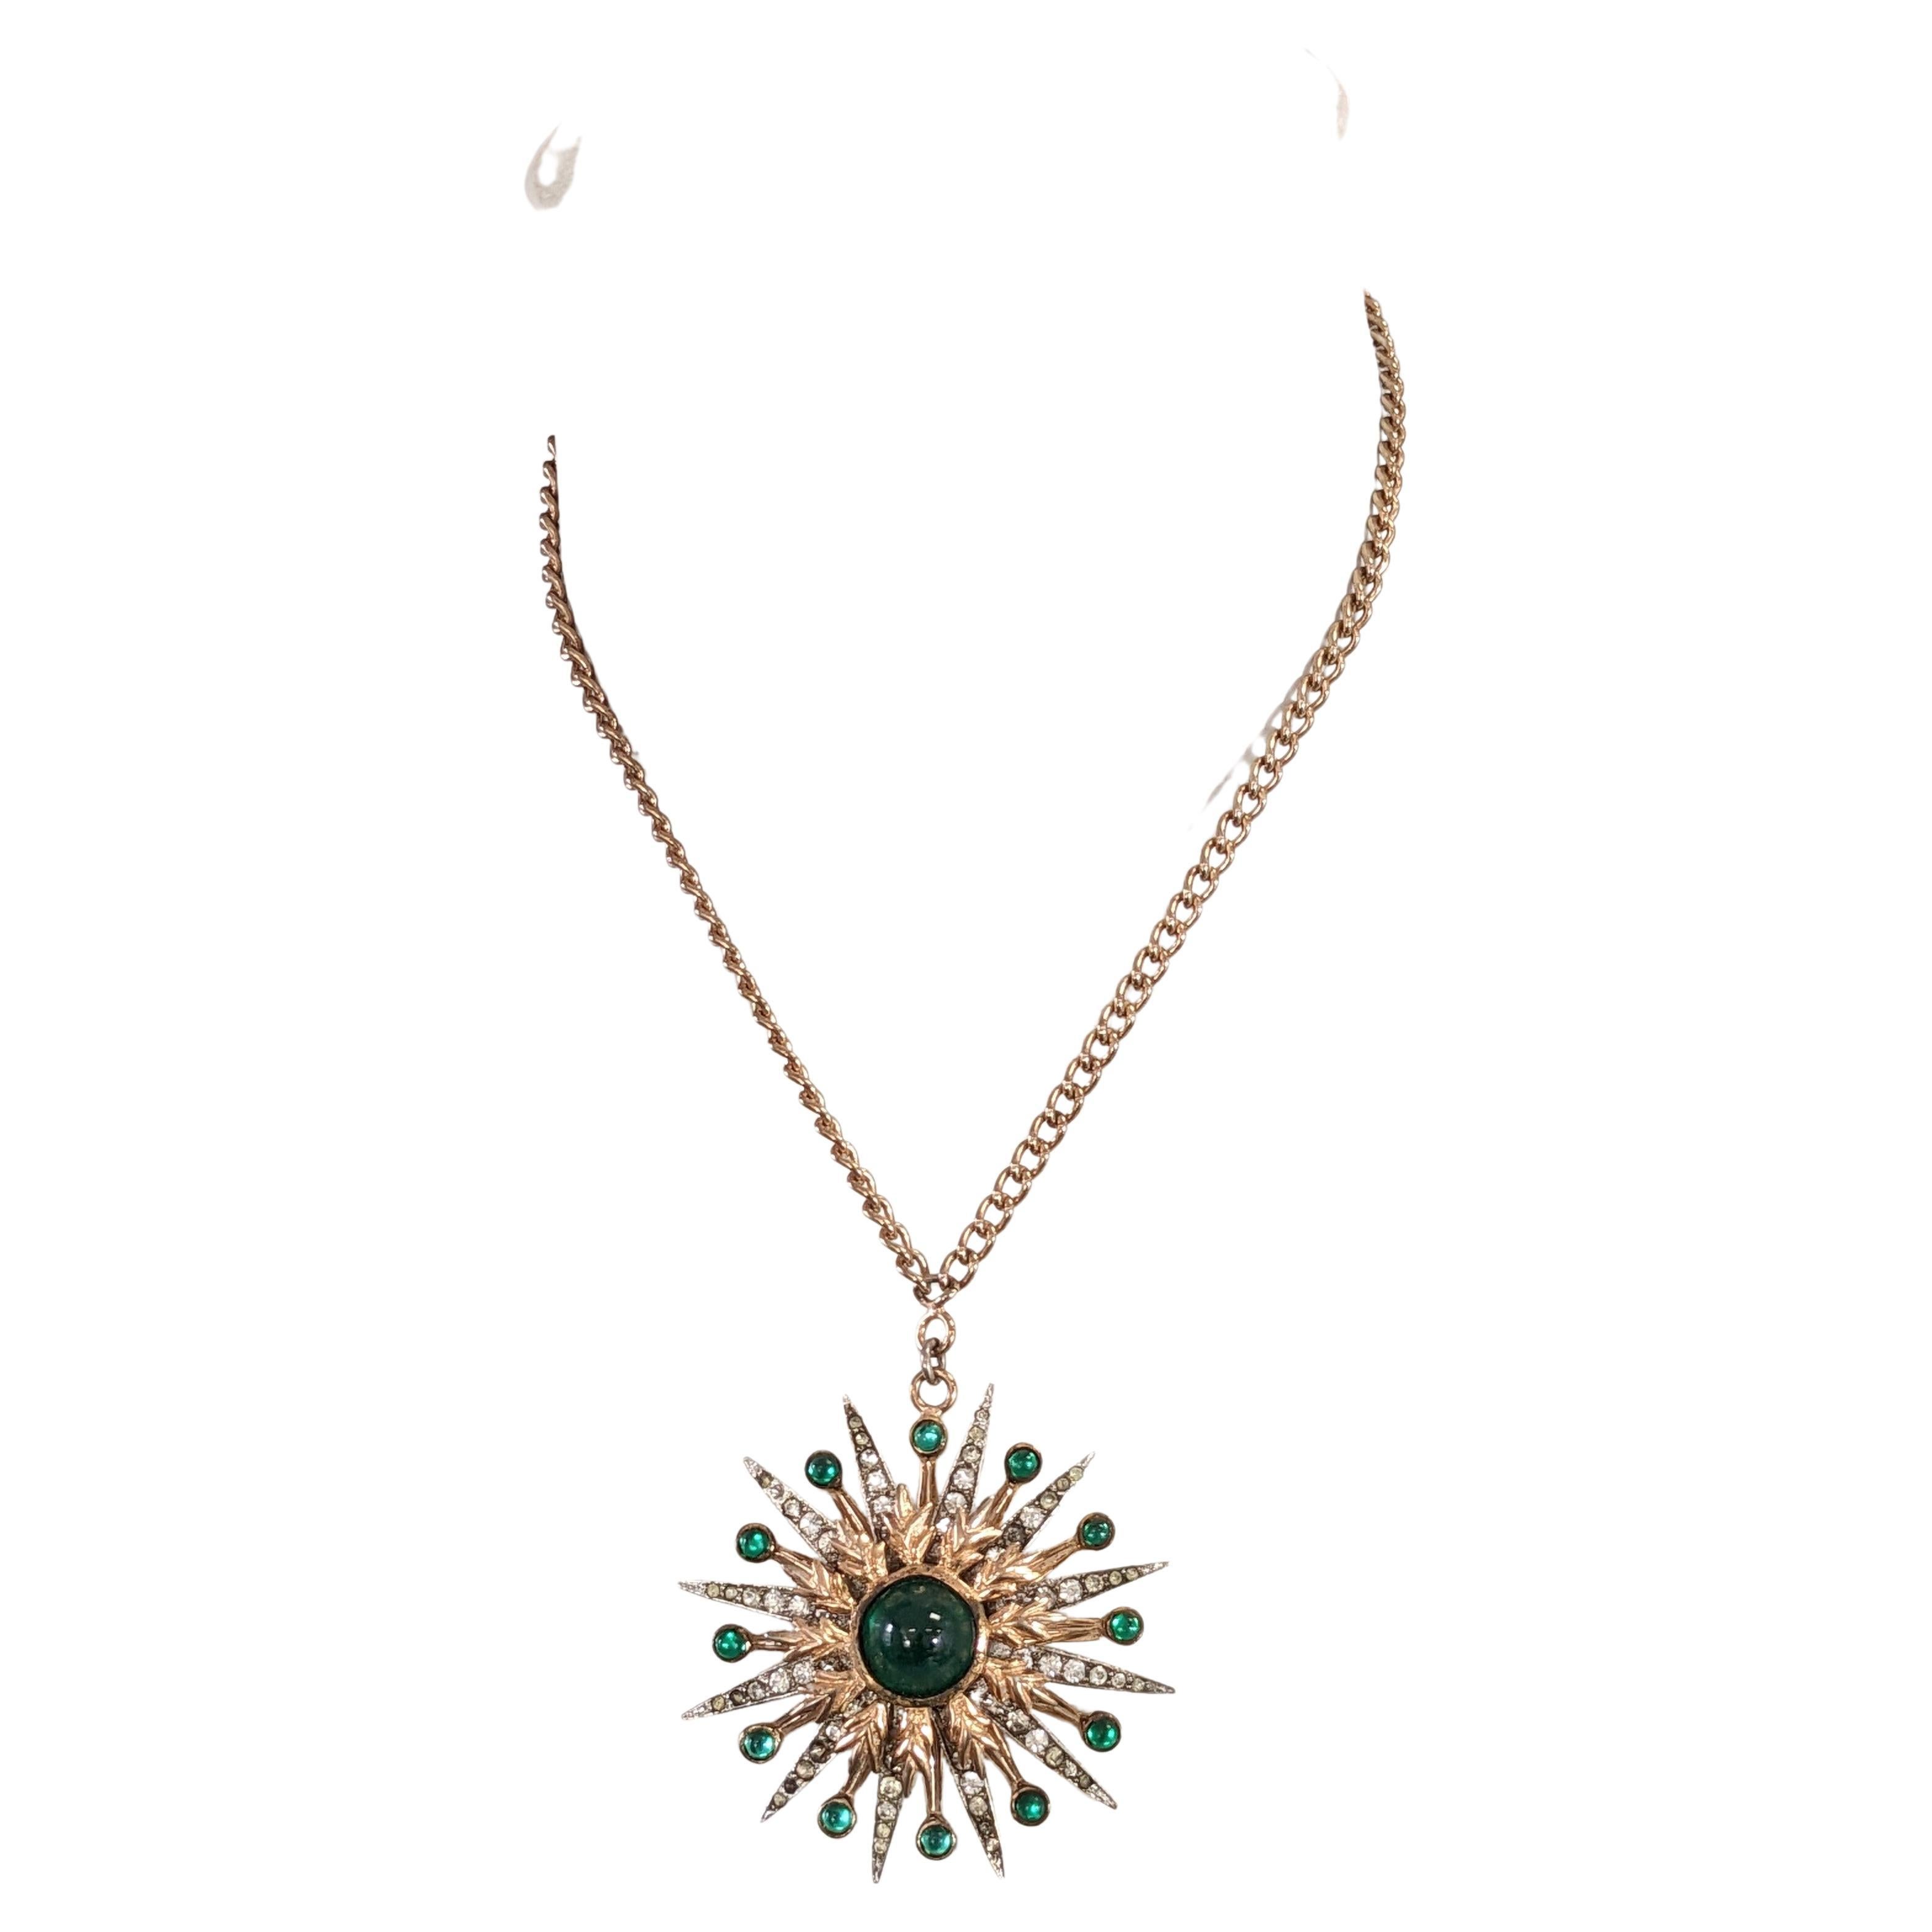 Nettie Rosenstein Vermeil Starburst Pendant set in sterling with pink gold vermeil finish. Set with crystal pastes and emerald cabocchons. Circa 1940's on original chain. 1940's USA. Signed. Pendant 2